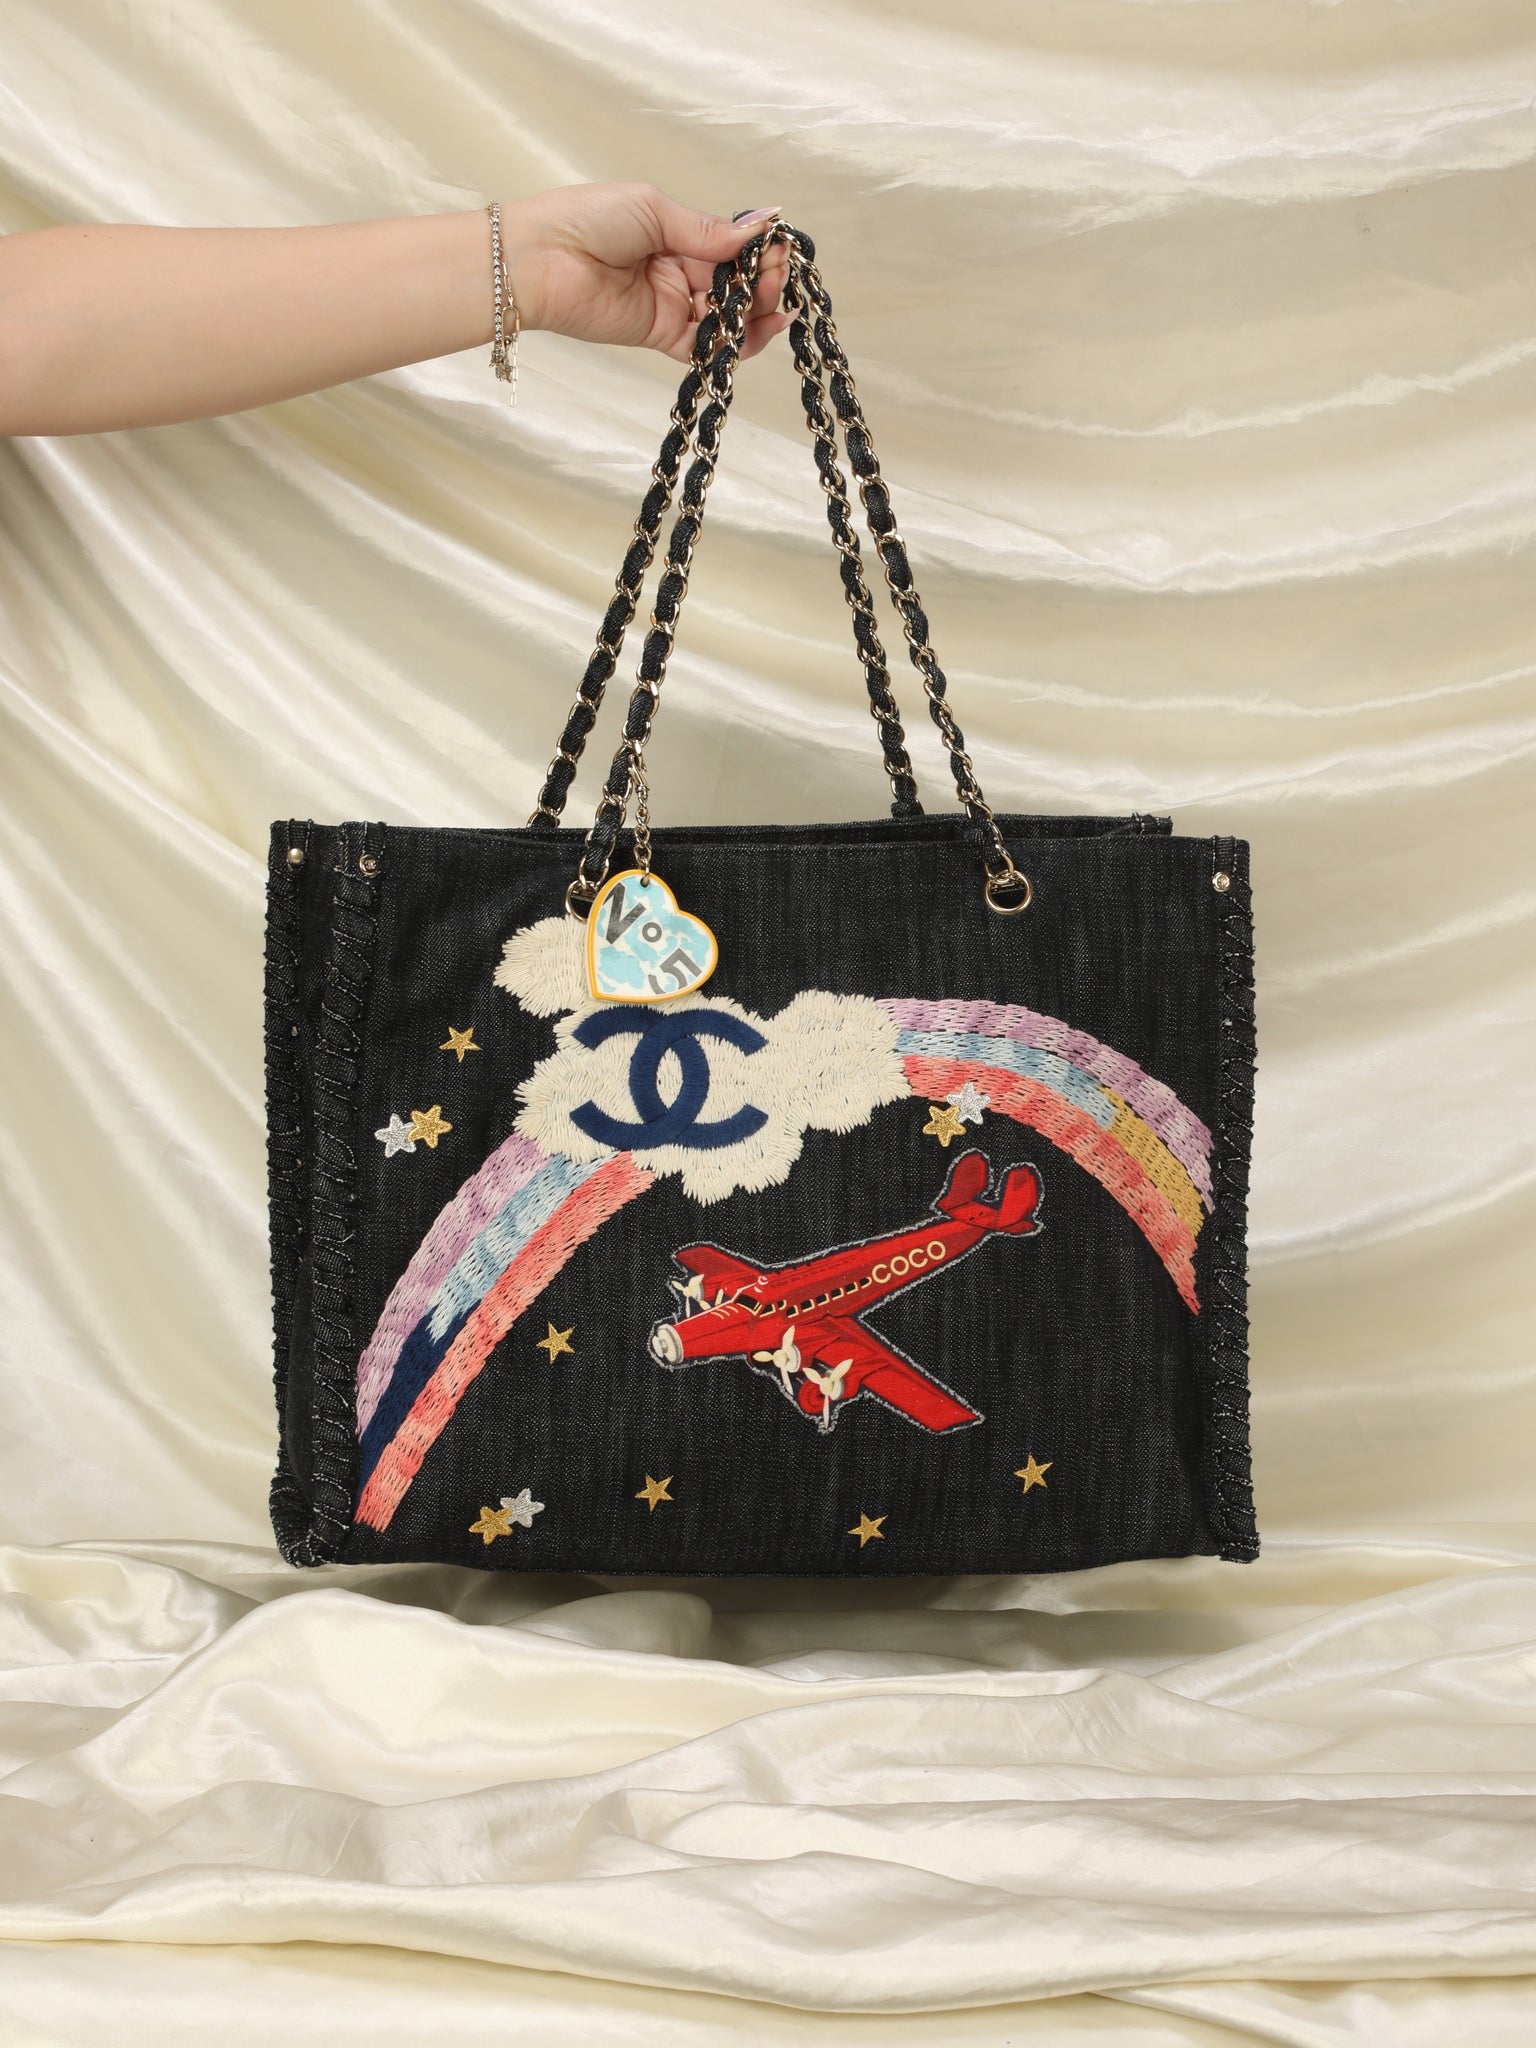 Extremely Rare Limited Edition Chanel Denim Embroidered Tote